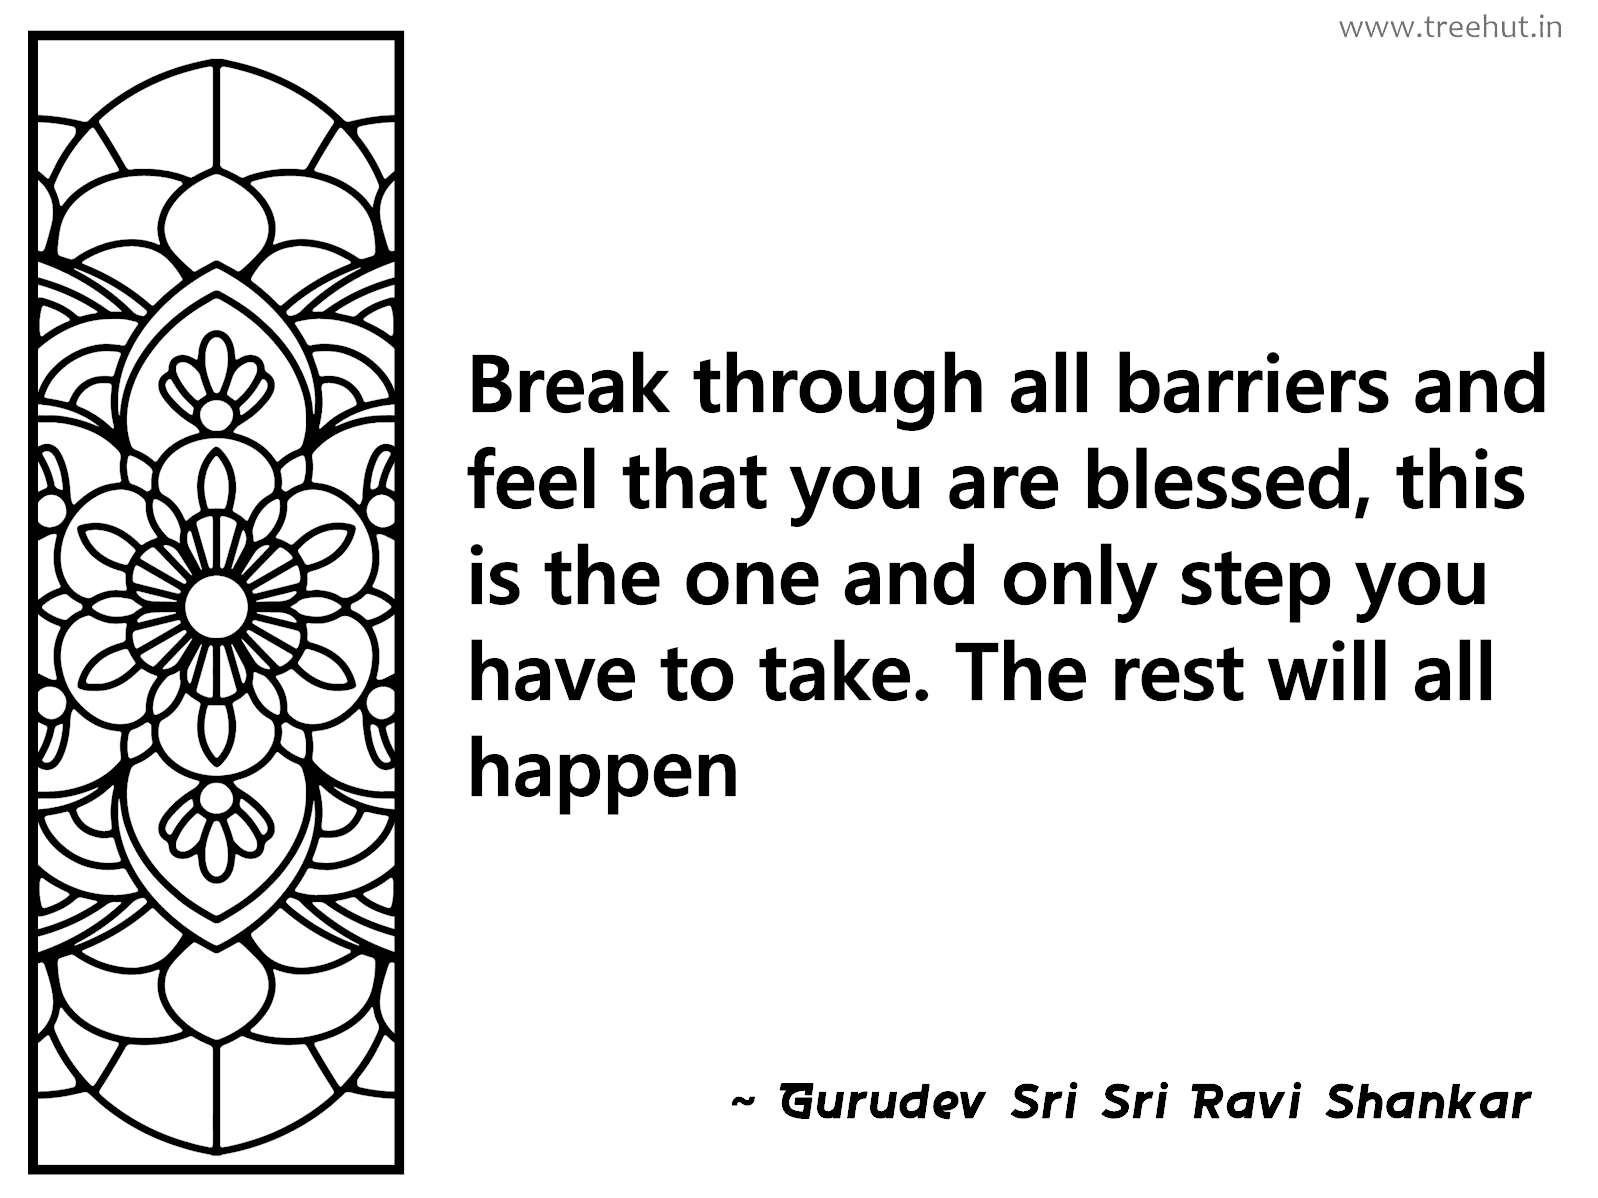 Break through all barriers and feel that you are blessed, this is the one and only step you have to take. The rest will all happen Inspirational Quote by Gurudev Sri Sri Ravi Shankar, coloring pages